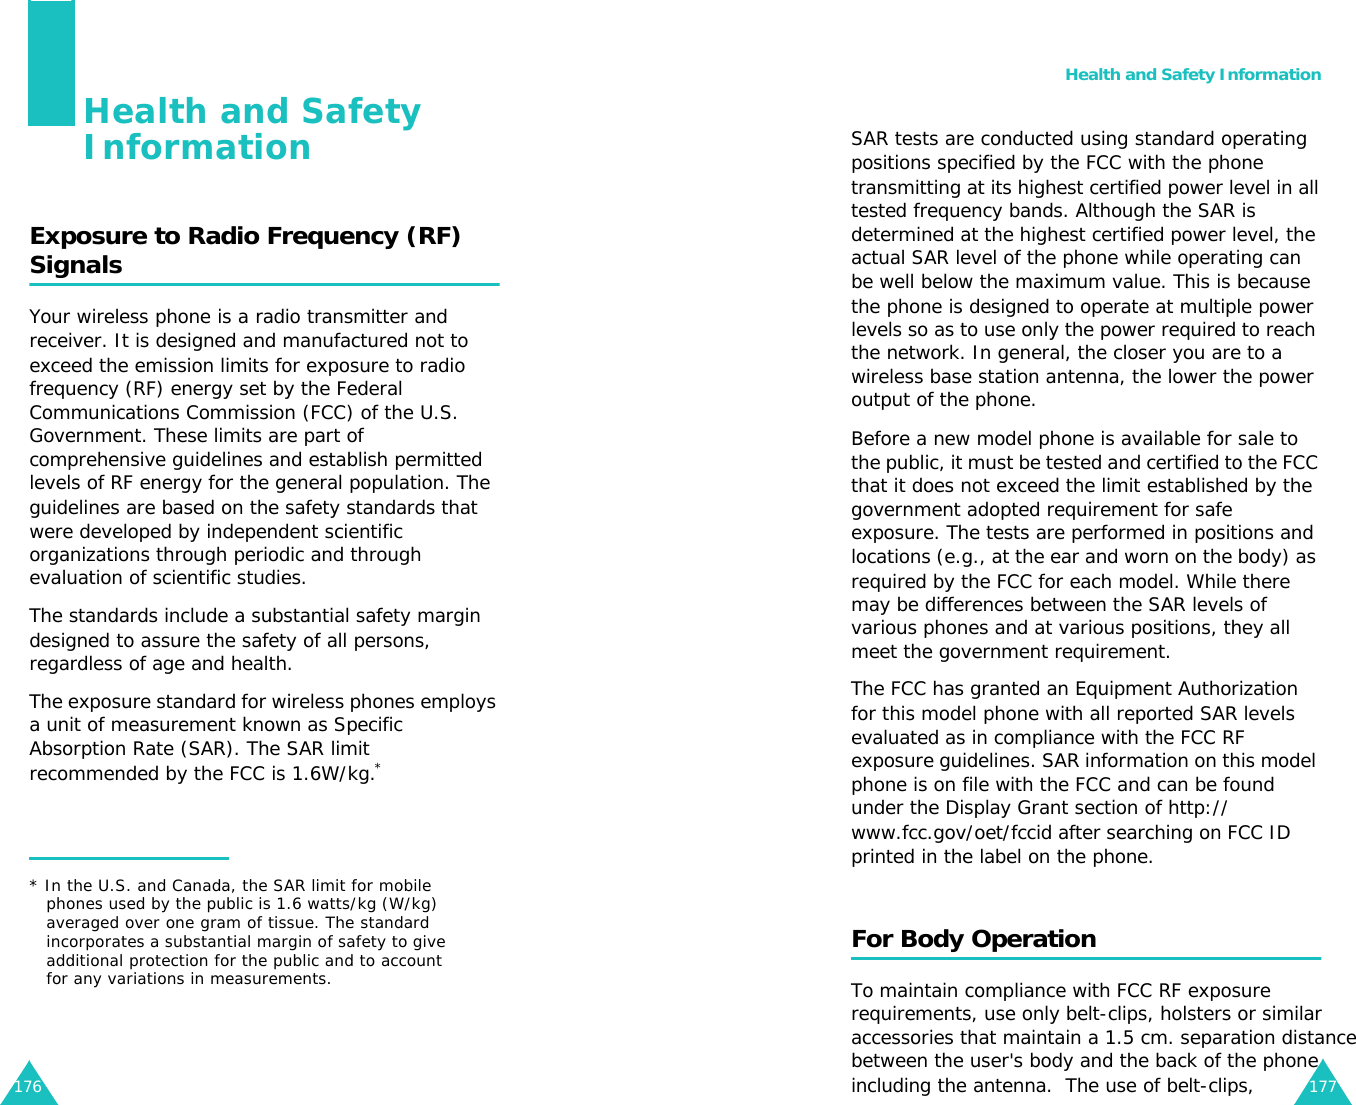 176Health and Safety InformationExposure to Radio Frequency (RF) SignalsYour wireless phone is a radio transmitter and receiver. It is designed and manufactured not to exceed the emission limits for exposure to radio frequency (RF) energy set by the Federal Communications Commission (FCC) of the U.S. Government. These limits are part of comprehensive guidelines and establish permitted levels of RF energy for the general population. The guidelines are based on the safety standards that were developed by independent scientific organizations through periodic and through evaluation of scientific studies.The standards include a substantial safety margin designed to assure the safety of all persons, regardless of age and health.          The exposure standard for wireless phones employs a unit of measurement known as Specific Absorption Rate (SAR). The SAR limit recommended by the FCC is 1.6W/kg.** In the U.S. and Canada, the SAR limit for mobile phones used by the public is 1.6 watts/kg (W/kg) averaged over one gram of tissue. The standard incorporates a substantial margin of safety to give additional protection for the public and to account for any variations in measurements.Health and Safety Information177SAR tests are conducted using standard operating positions specified by the FCC with the phone transmitting at its highest certified power level in all tested frequency bands. Although the SAR is determined at the highest certified power level, the actual SAR level of the phone while operating can be well below the maximum value. This is because the phone is designed to operate at multiple power levels so as to use only the power required to reach the network. In general, the closer you are to a wireless base station antenna, the lower the power output of the phone.Before a new model phone is available for sale to the public, it must be tested and certified to the FCC that it does not exceed the limit established by the government adopted requirement for safe exposure. The tests are performed in positions and locations (e.g., at the ear and worn on the body) as required by the FCC for each model. While there may be differences between the SAR levels of various phones and at various positions, they all meet the government requirement.The FCC has granted an Equipment Authorization for this model phone with all reported SAR levels evaluated as in compliance with the FCC RF exposure guidelines. SAR information on this model phone is on file with the FCC and can be found under the Display Grant section of http://www.fcc.gov/oet/fccid after searching on FCC ID printed in the label on the phone.For Body OperationTo maintain compliance with FCC RF exposurerequirements, use only belt-clips, holsters or similaraccessories that maintain a 1.5 cm. separation distancebetween the user&apos;s body and the back of the phoneincluding the antenna.  The use of belt-clips,